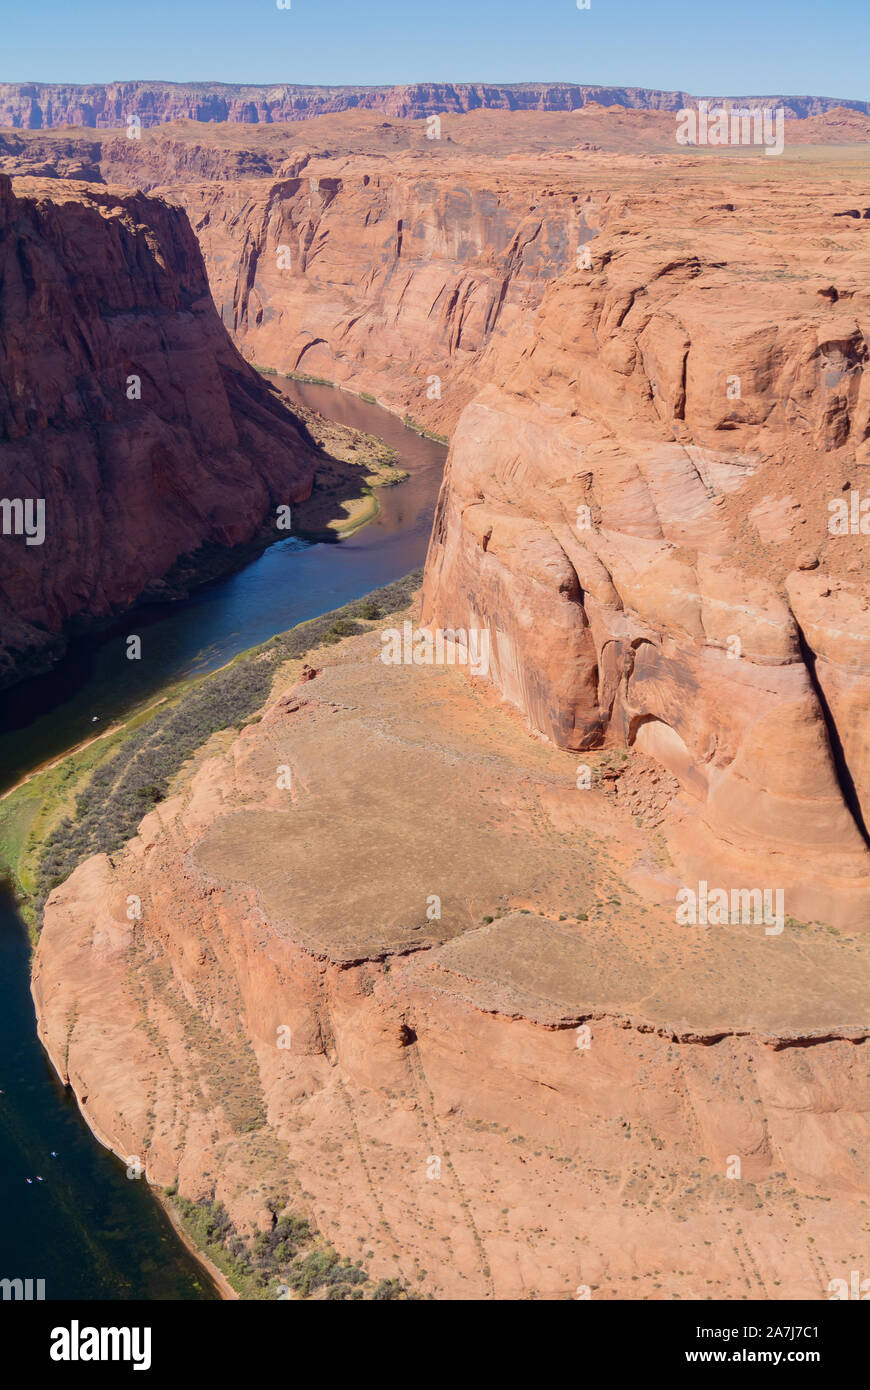 Aerial view of horseshoe bend with colorado river ,arizona,united states of america Stock Photo